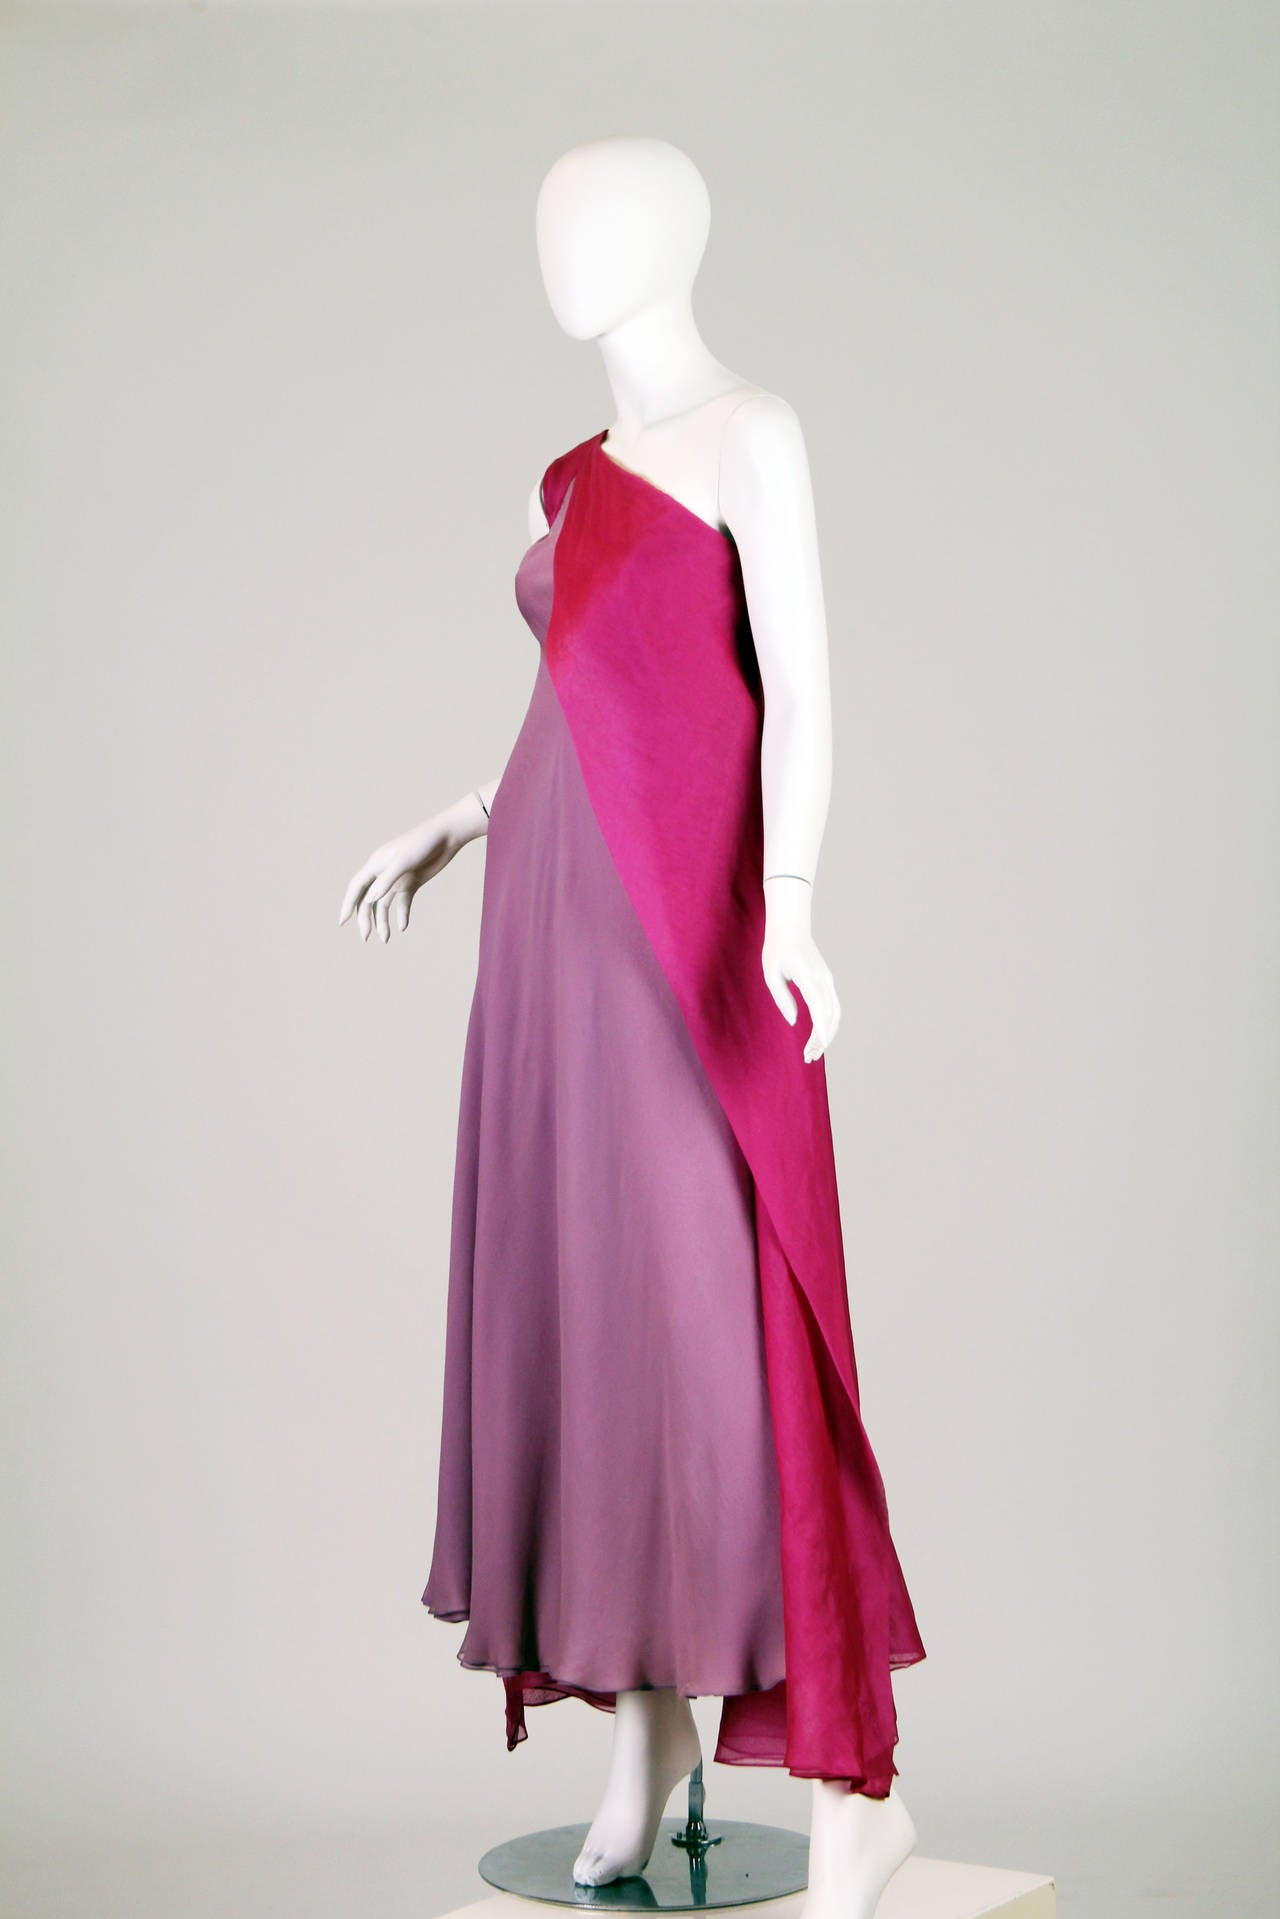 Designer to no less the likes of Lady Bird Johnson, Jacqueline Kennedy and Elizabeth Taylor. George Stavropoulos is a lesser know designer of the highest ilk, charging as much as Parisienne Haute Couture. It is a rare treat to come across one of his